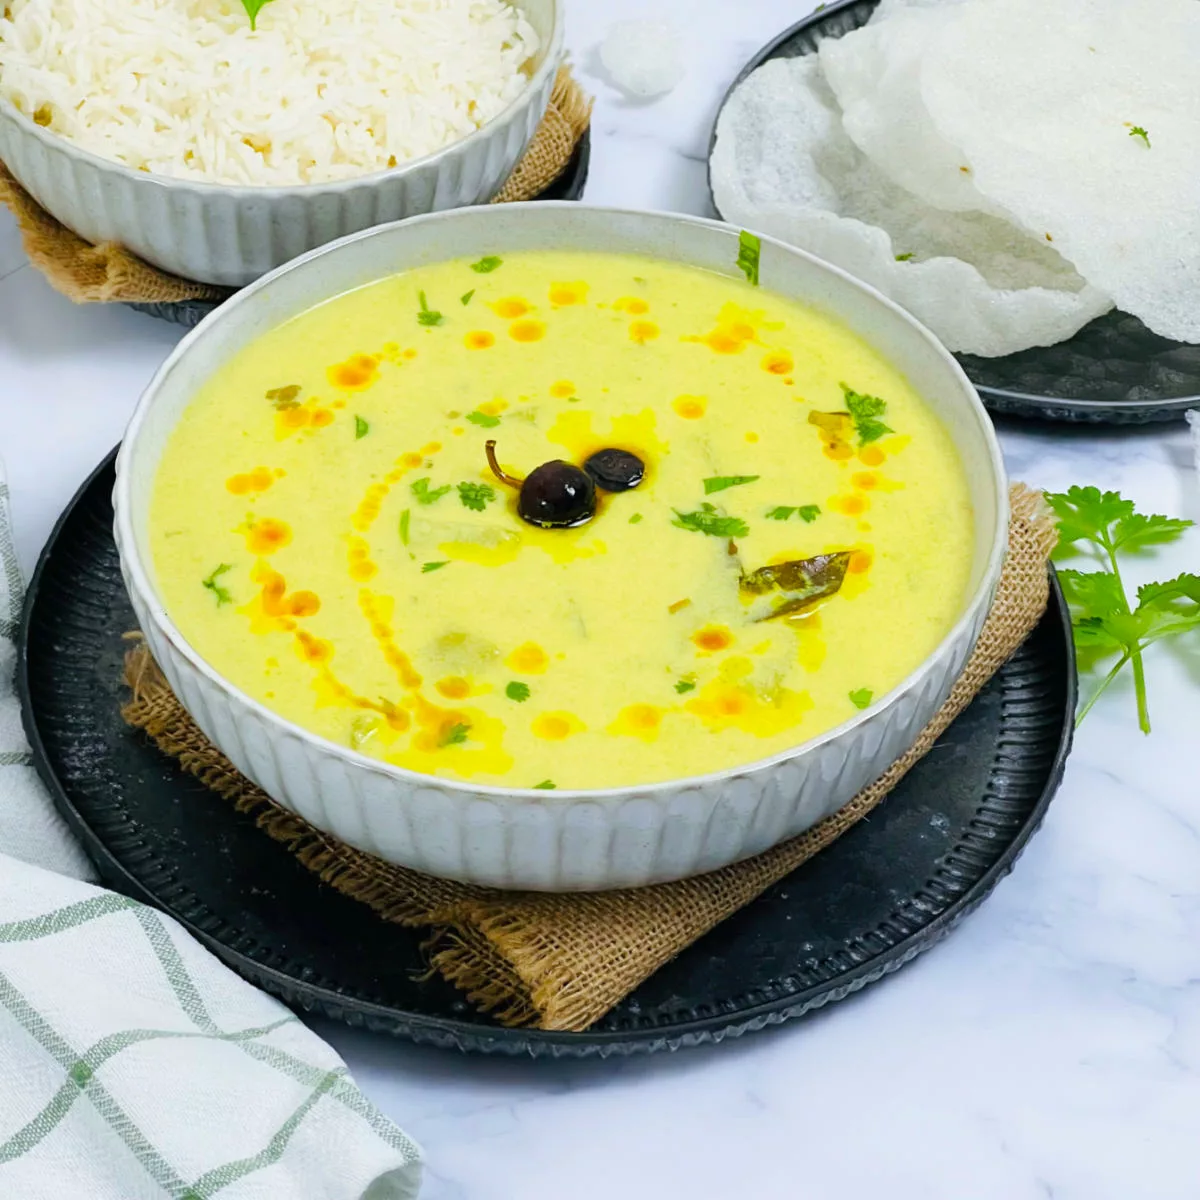 South Indian majjige huli served in a white bowl.